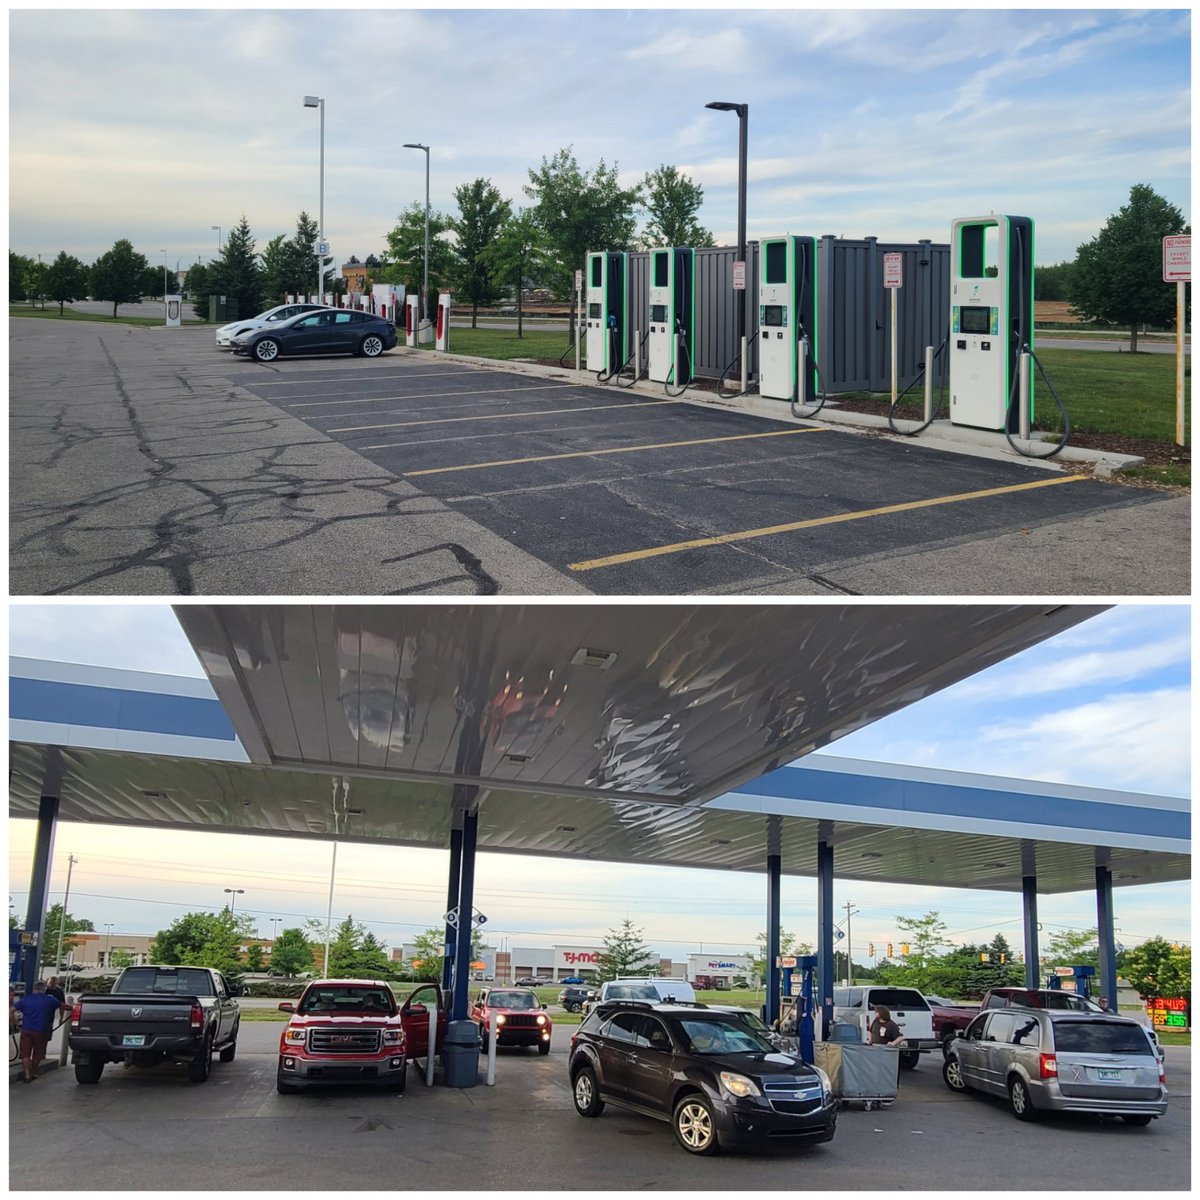 1/2. The future is electric? North I-75 interchange on busy summer weekend. Meijer gas station,, cars/trucks /trailers 2-3 deep waiting for fuel. At Meijer Tesla/EA chargers ...11 of 13 bays are open. Gaylord, MI https://t.co/r3Atebsbcf